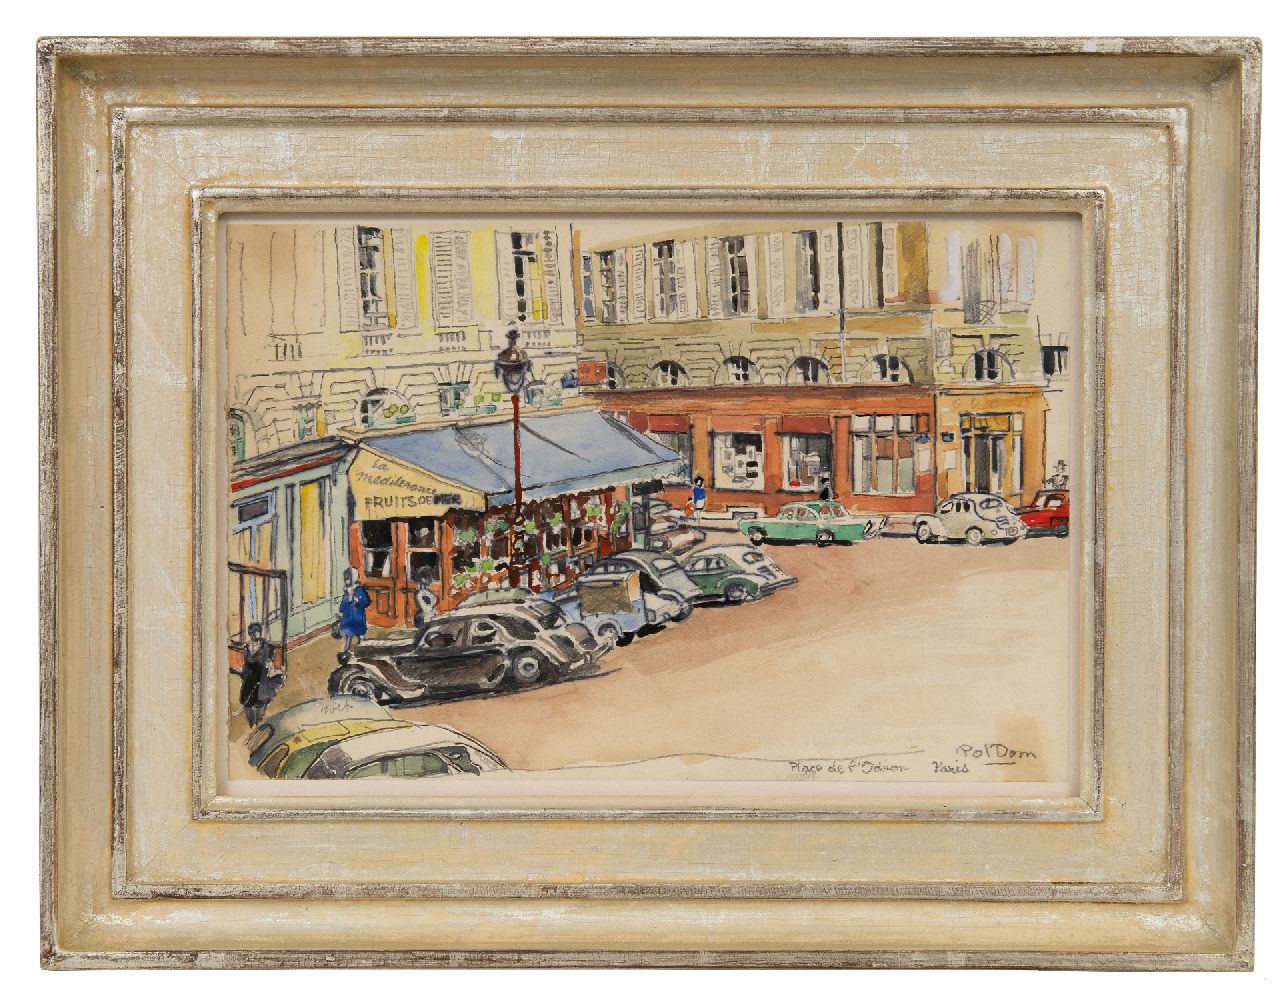 Dom P.L.C.  | Paulus Ludovicus Carolus 'Pol' Dom | Watercolours and drawings offered for sale | Place de l'Odéon in Paris, with vintage cars, pencil, pen, ink and watercolour on paper 16.3 x 24.6 cm, signed l.r.